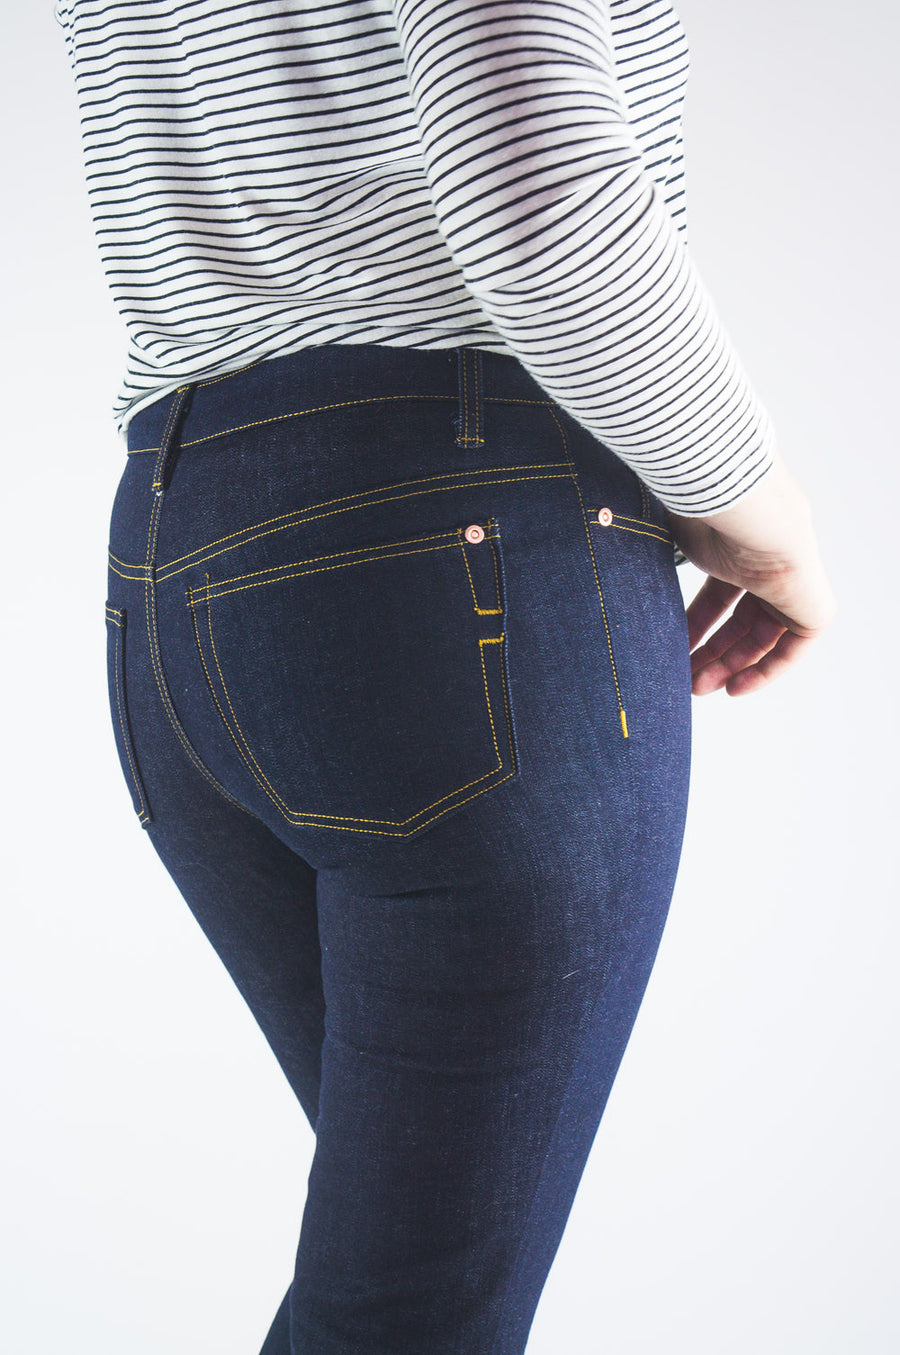 Ginger Mid-rise Skinny Jean Pattern // Jeans sewing pattern // Closet Core Patterns